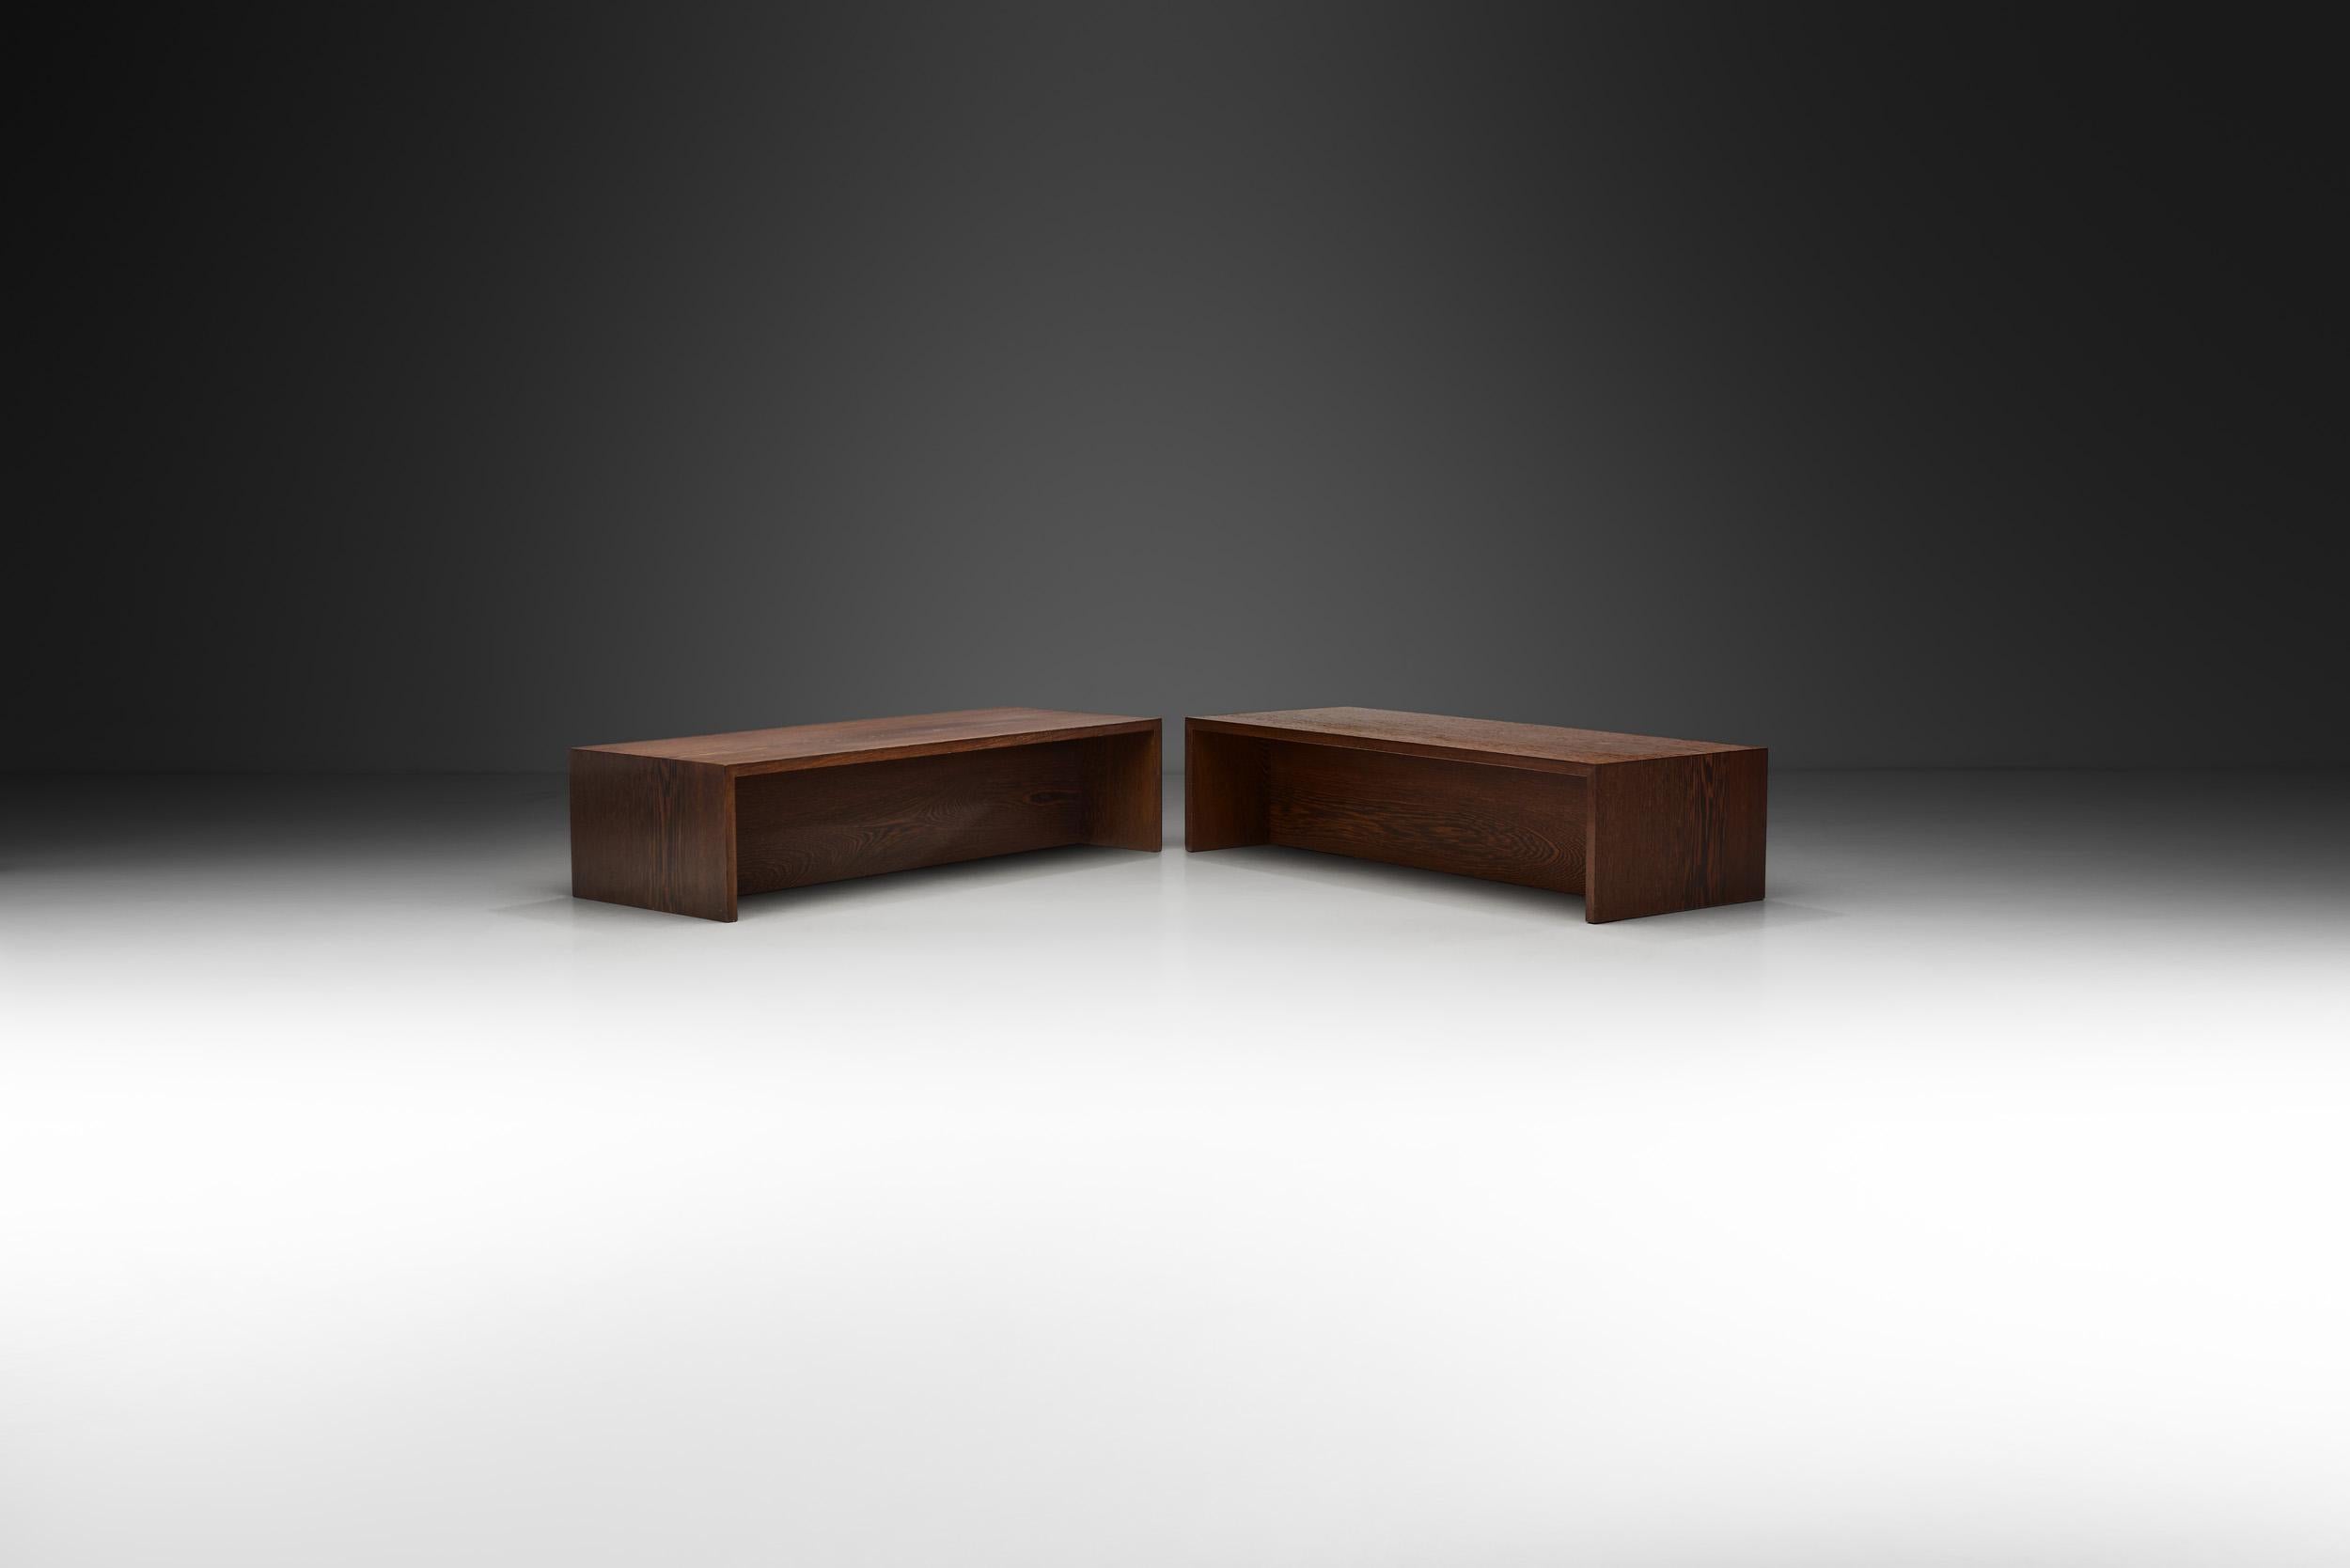 This understated, stylish pair of benches are versatile in their simplicity. They can be used as tables, or, thanks to their very sturdy constructions, can also easily be used as seating.

These benches are completely veneered in wenge hard wood,